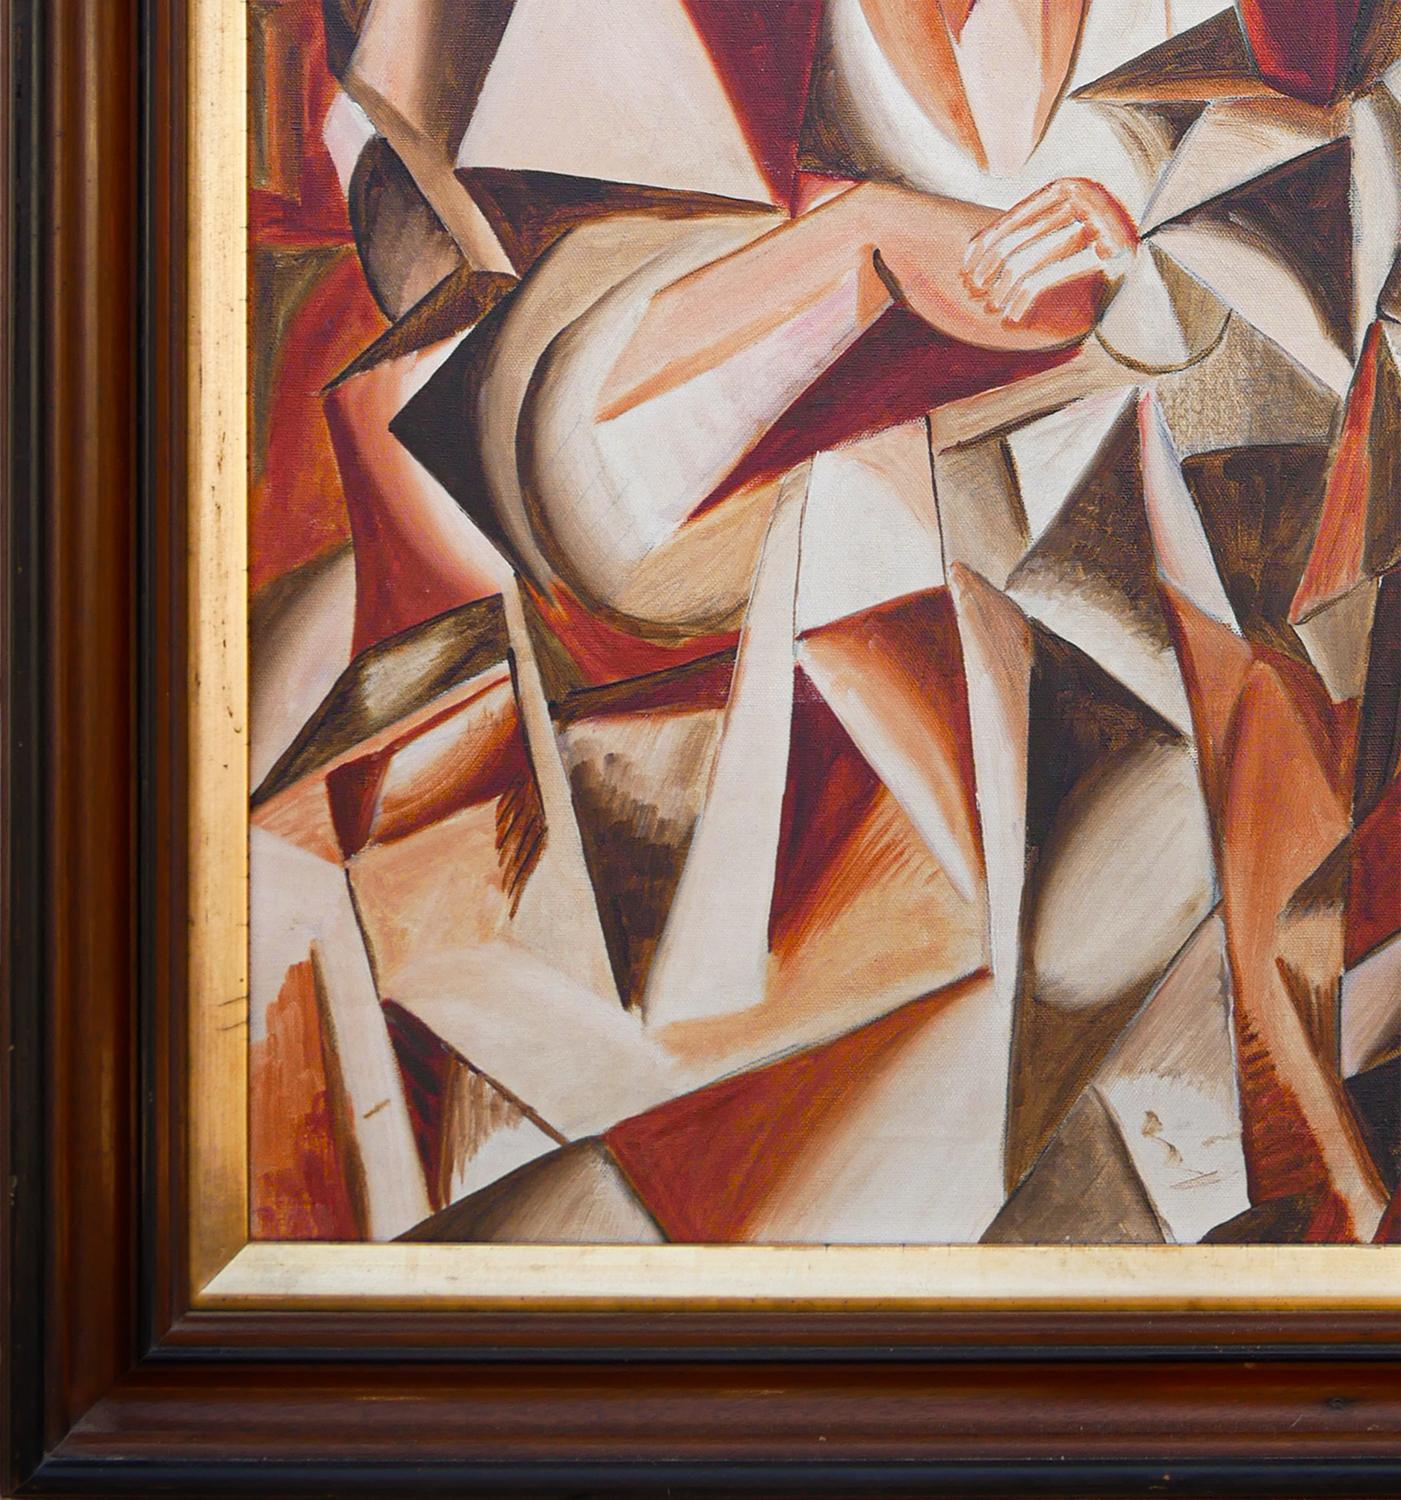 “Dienstag” Orange, Red, and Brown Abstract Cubist Figurative Painting 3